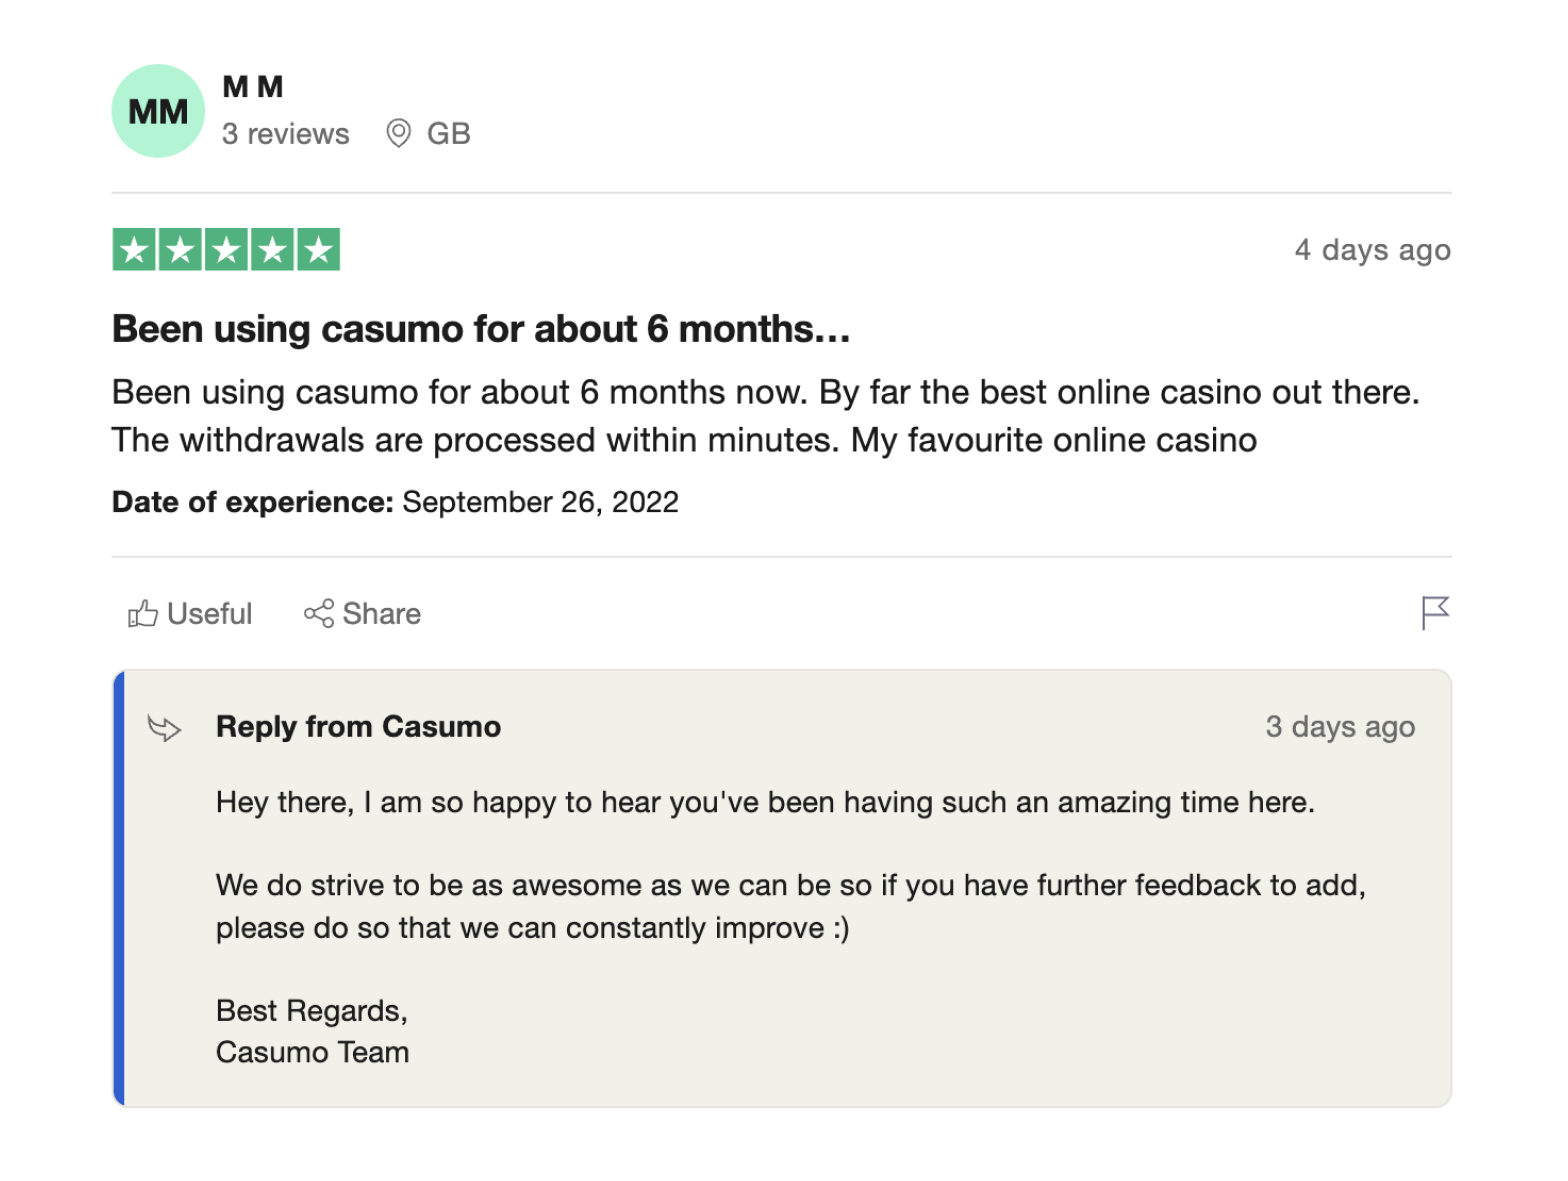 User review for the Casumo online casino on Trustpilot